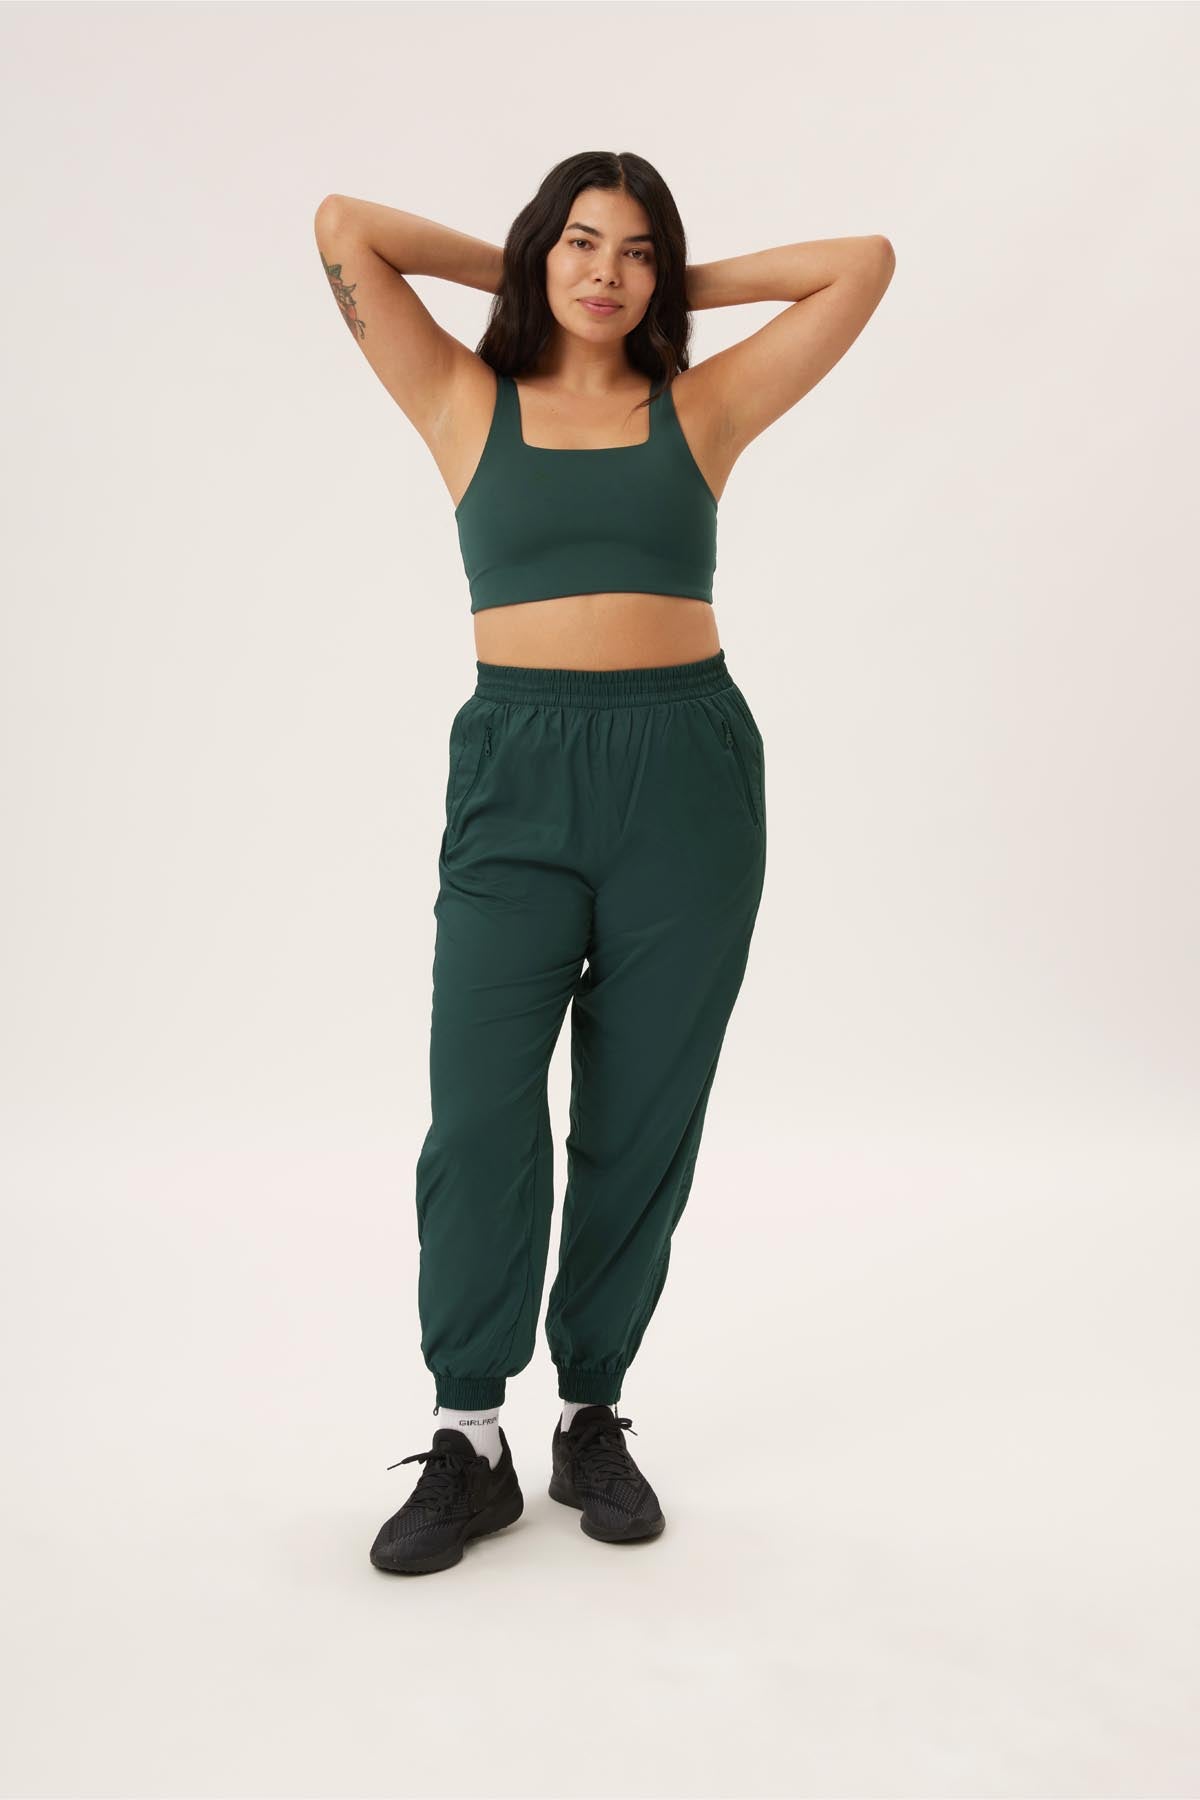 Girlfriend Collective Moss Green Summit Track Pant Small NWT